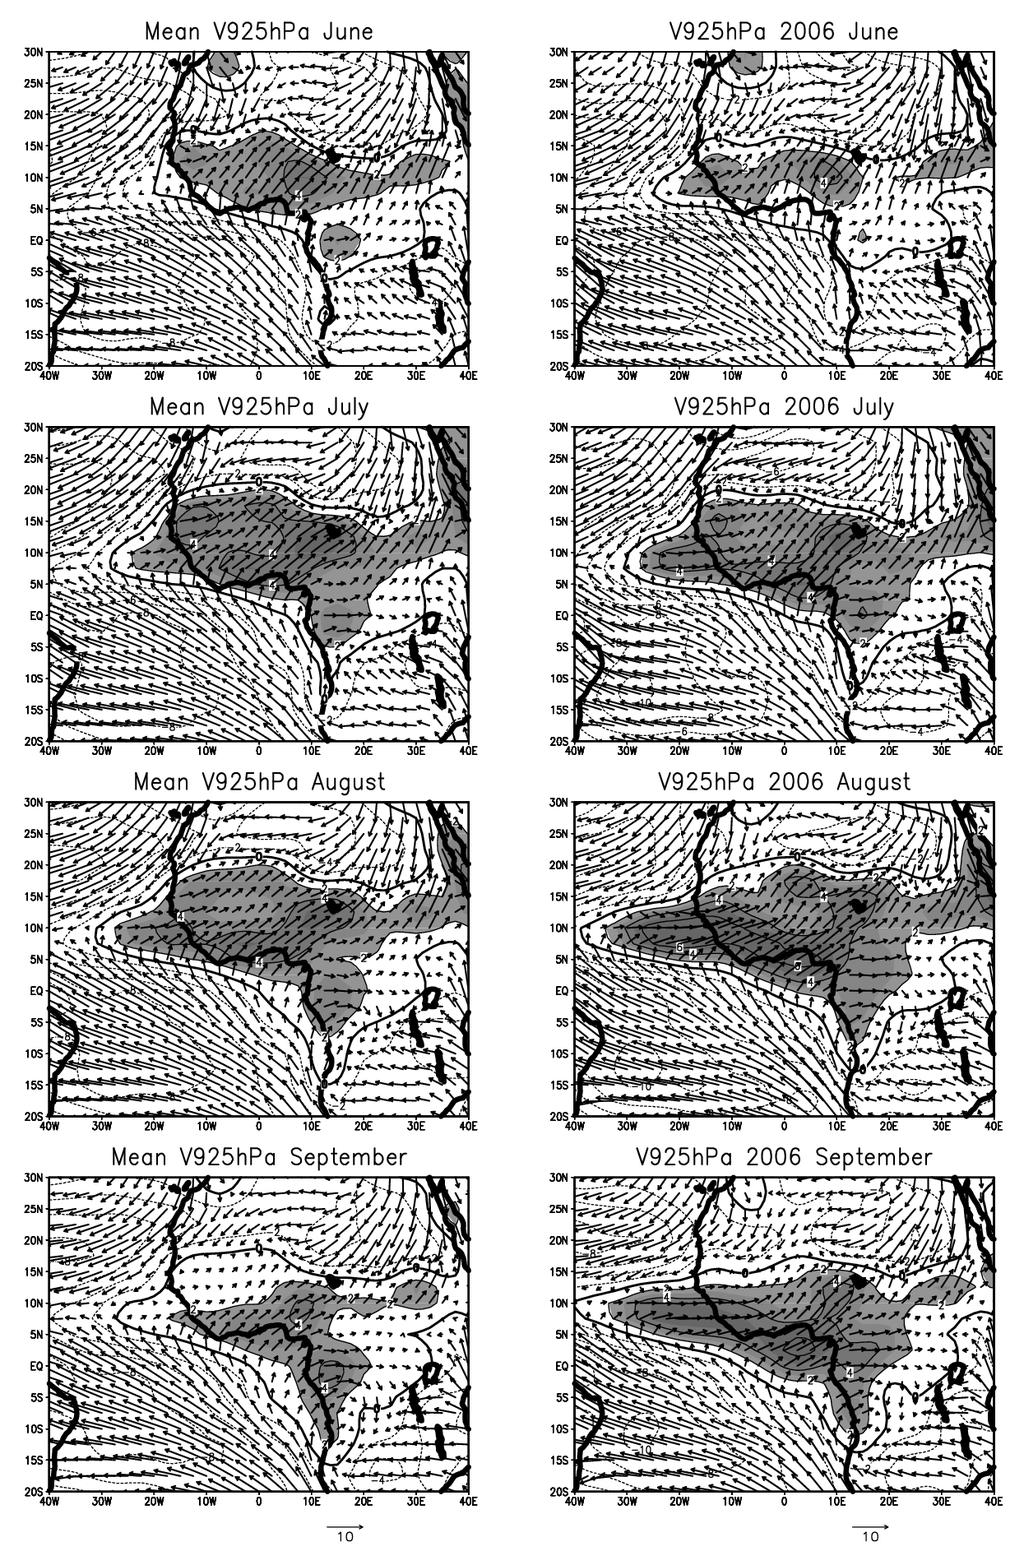 S. Janicot et al.: Overview of the summer monsoon over West Africa during AMMA 2573 Fig. 3.